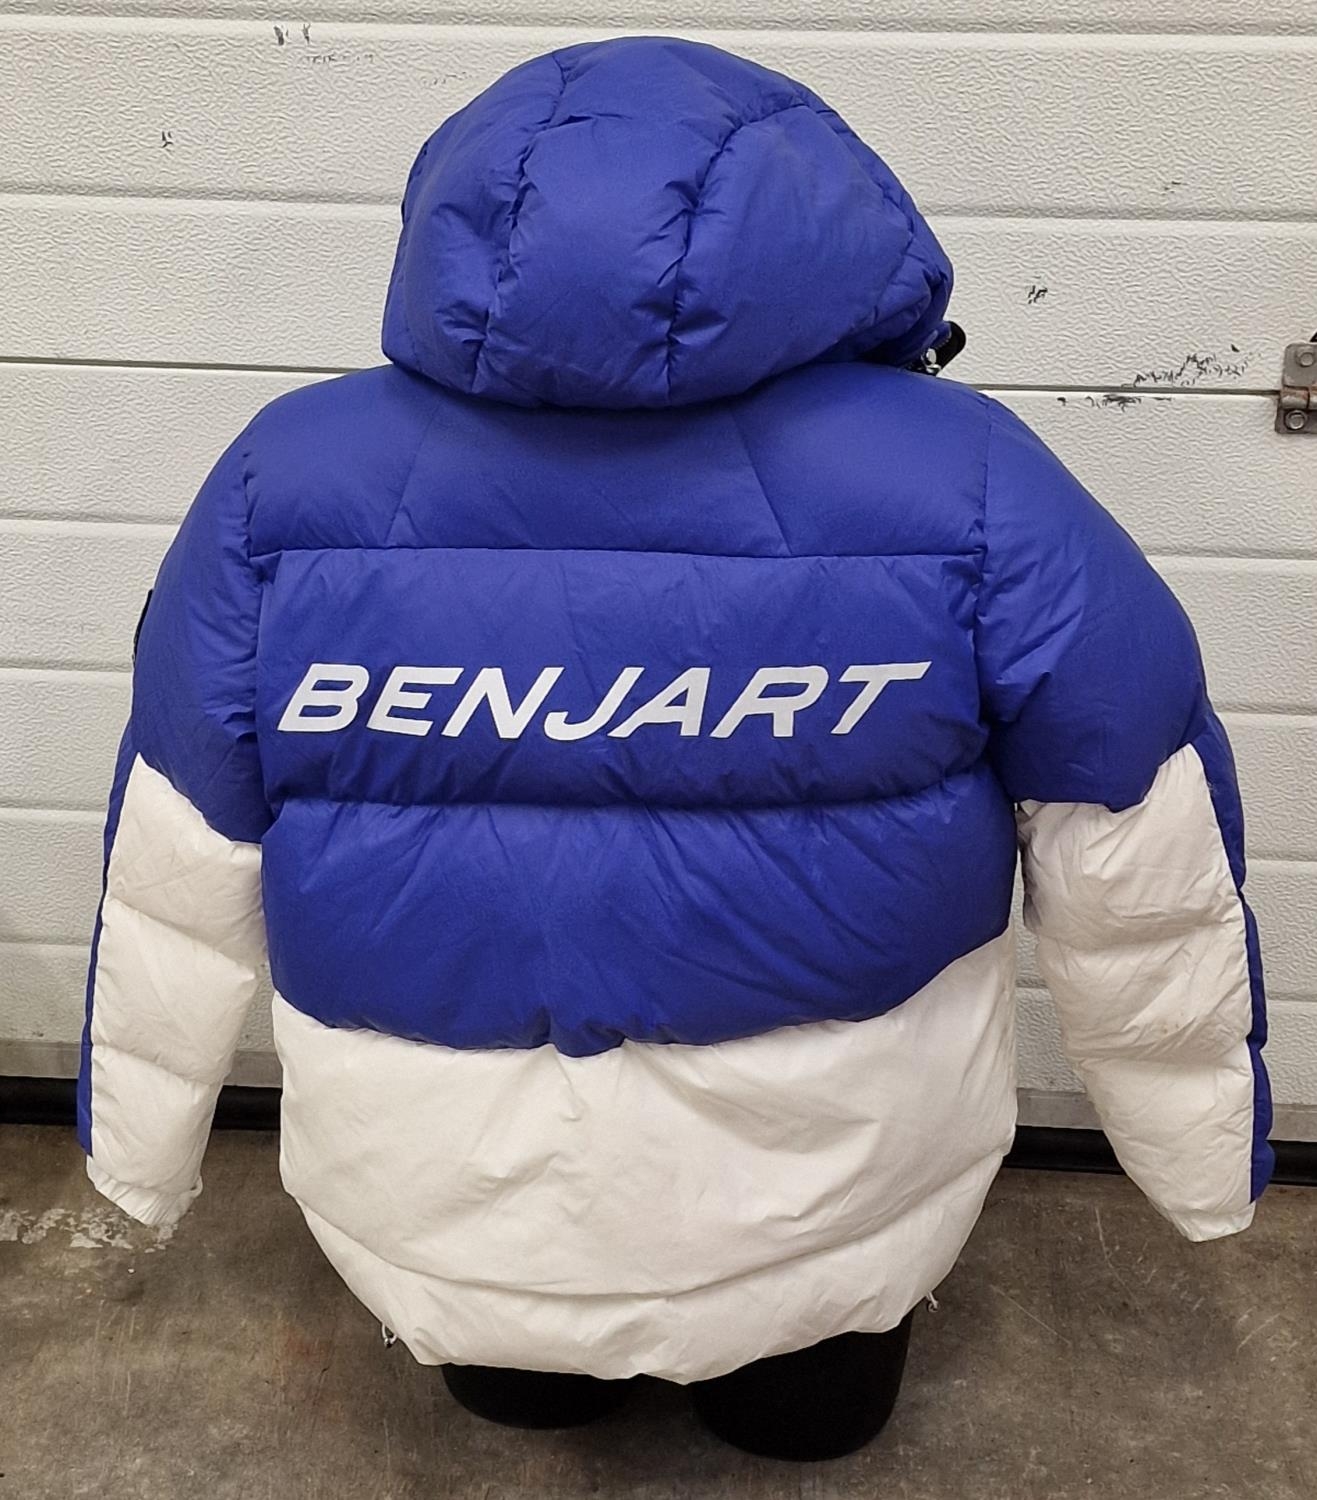 Mens blue and white Benjart puffer jacket size L BNWT (REF 229). - Image 2 of 3